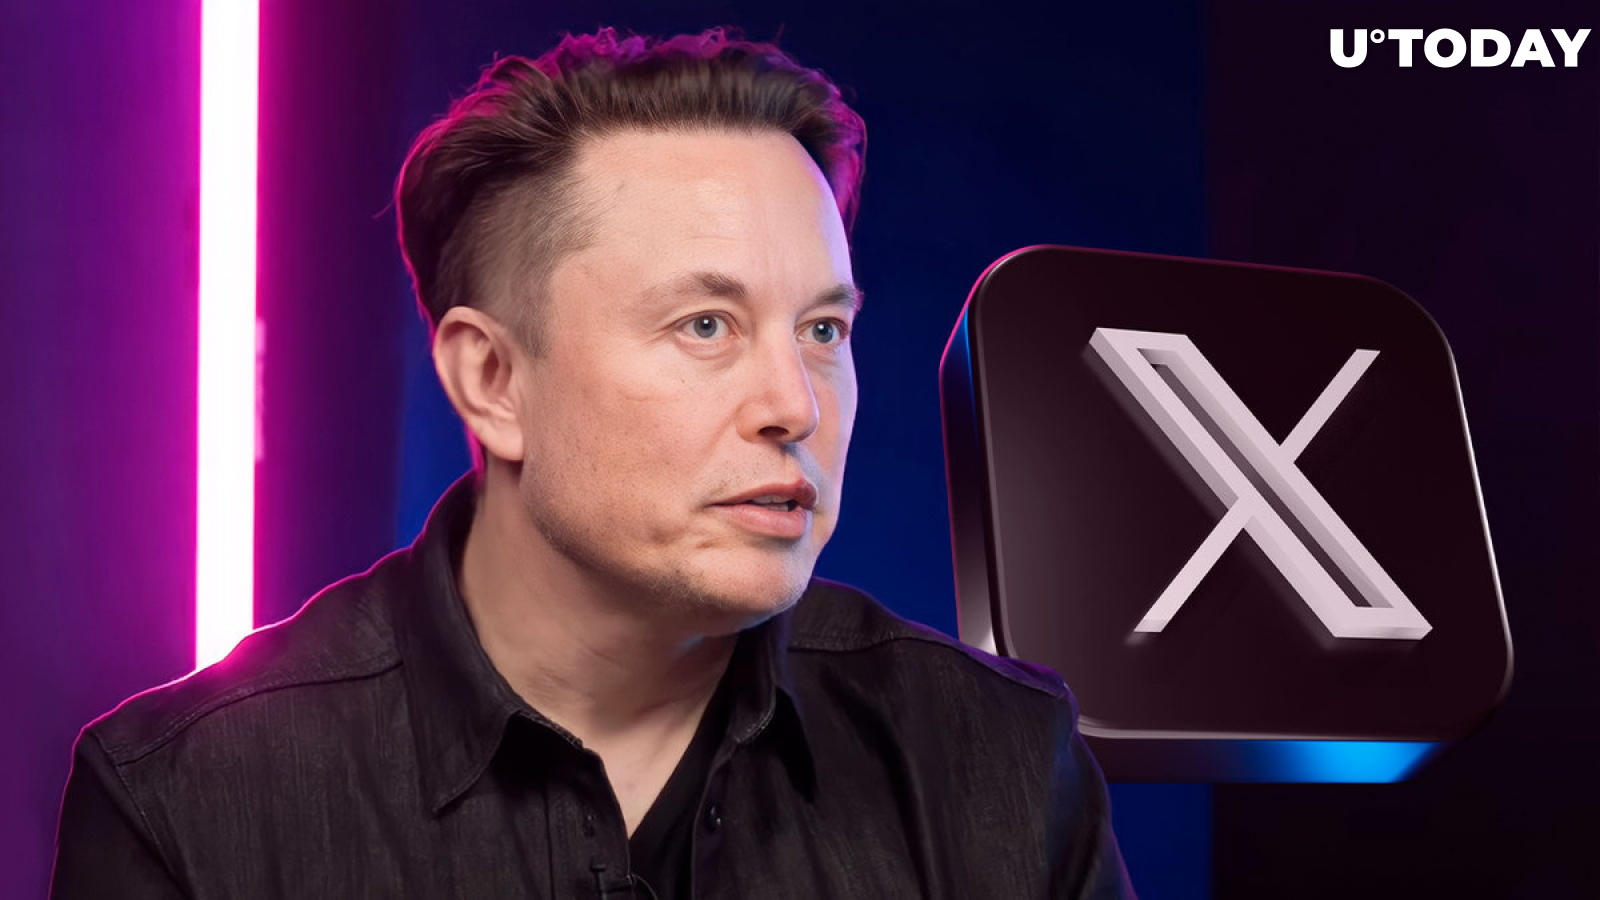 Elon Musk Promises X Update That Greatly Excites Crypto Community